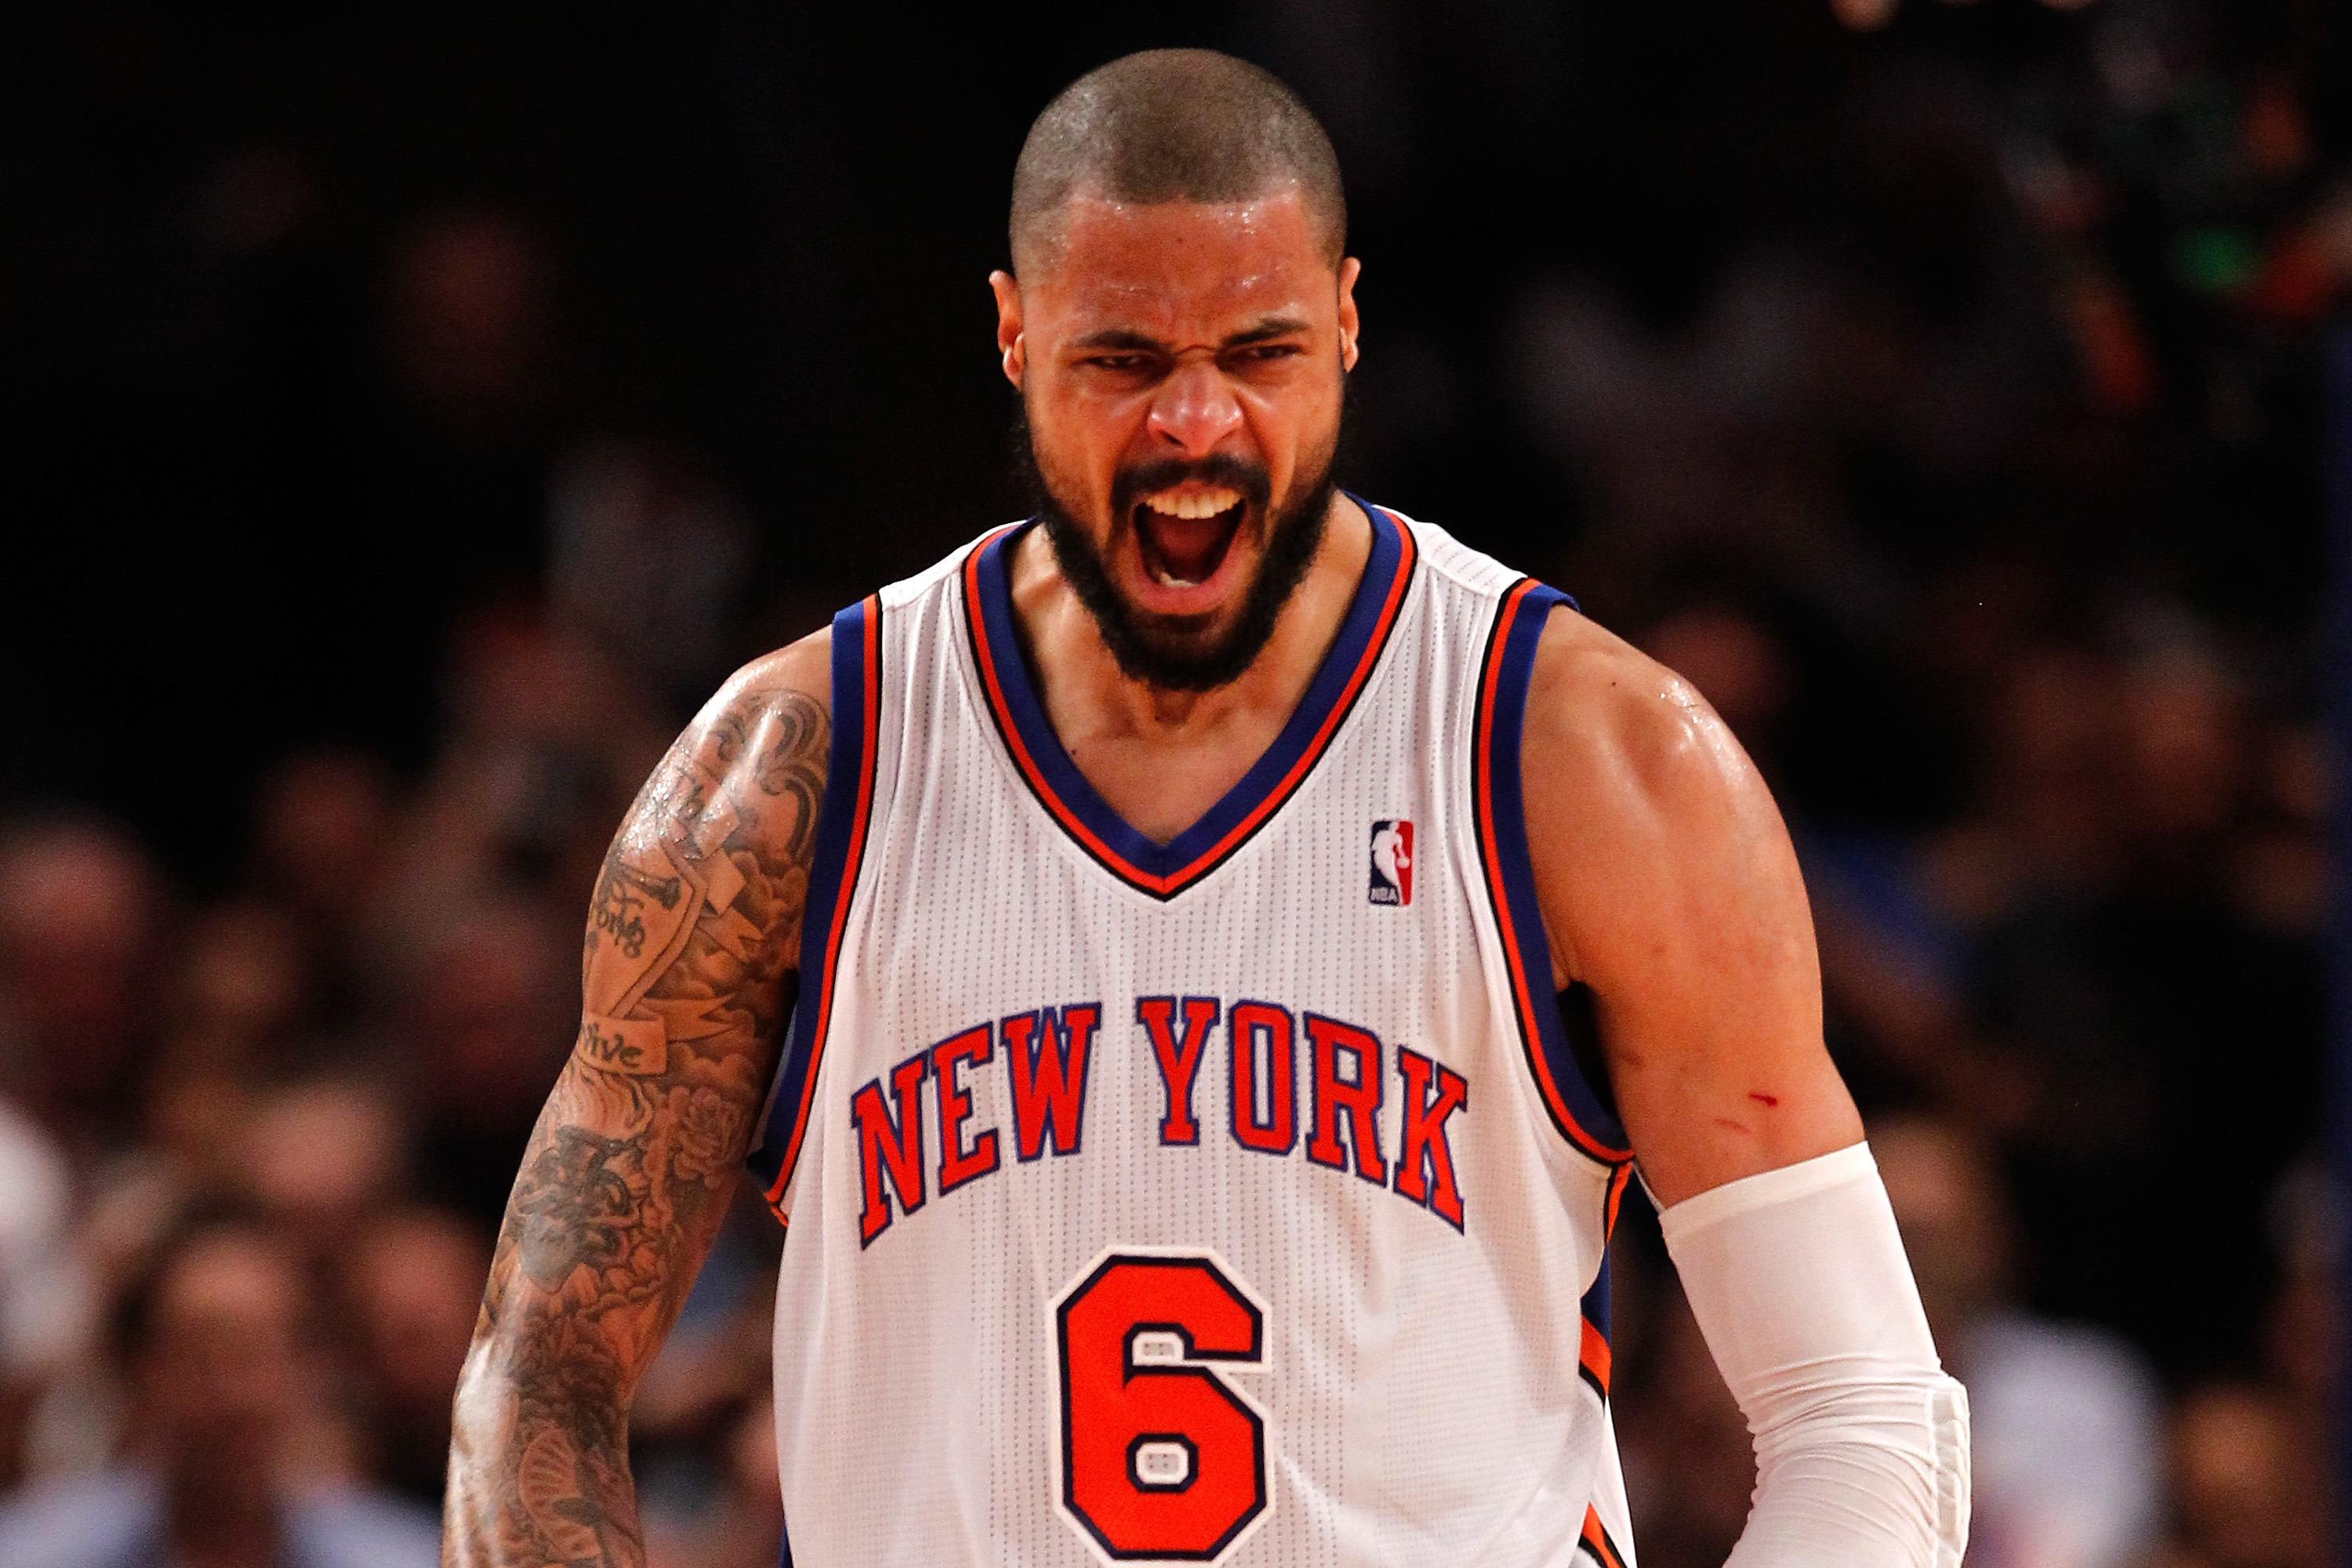 With new $24 billion television deal, Tyson Chandler is a lock to